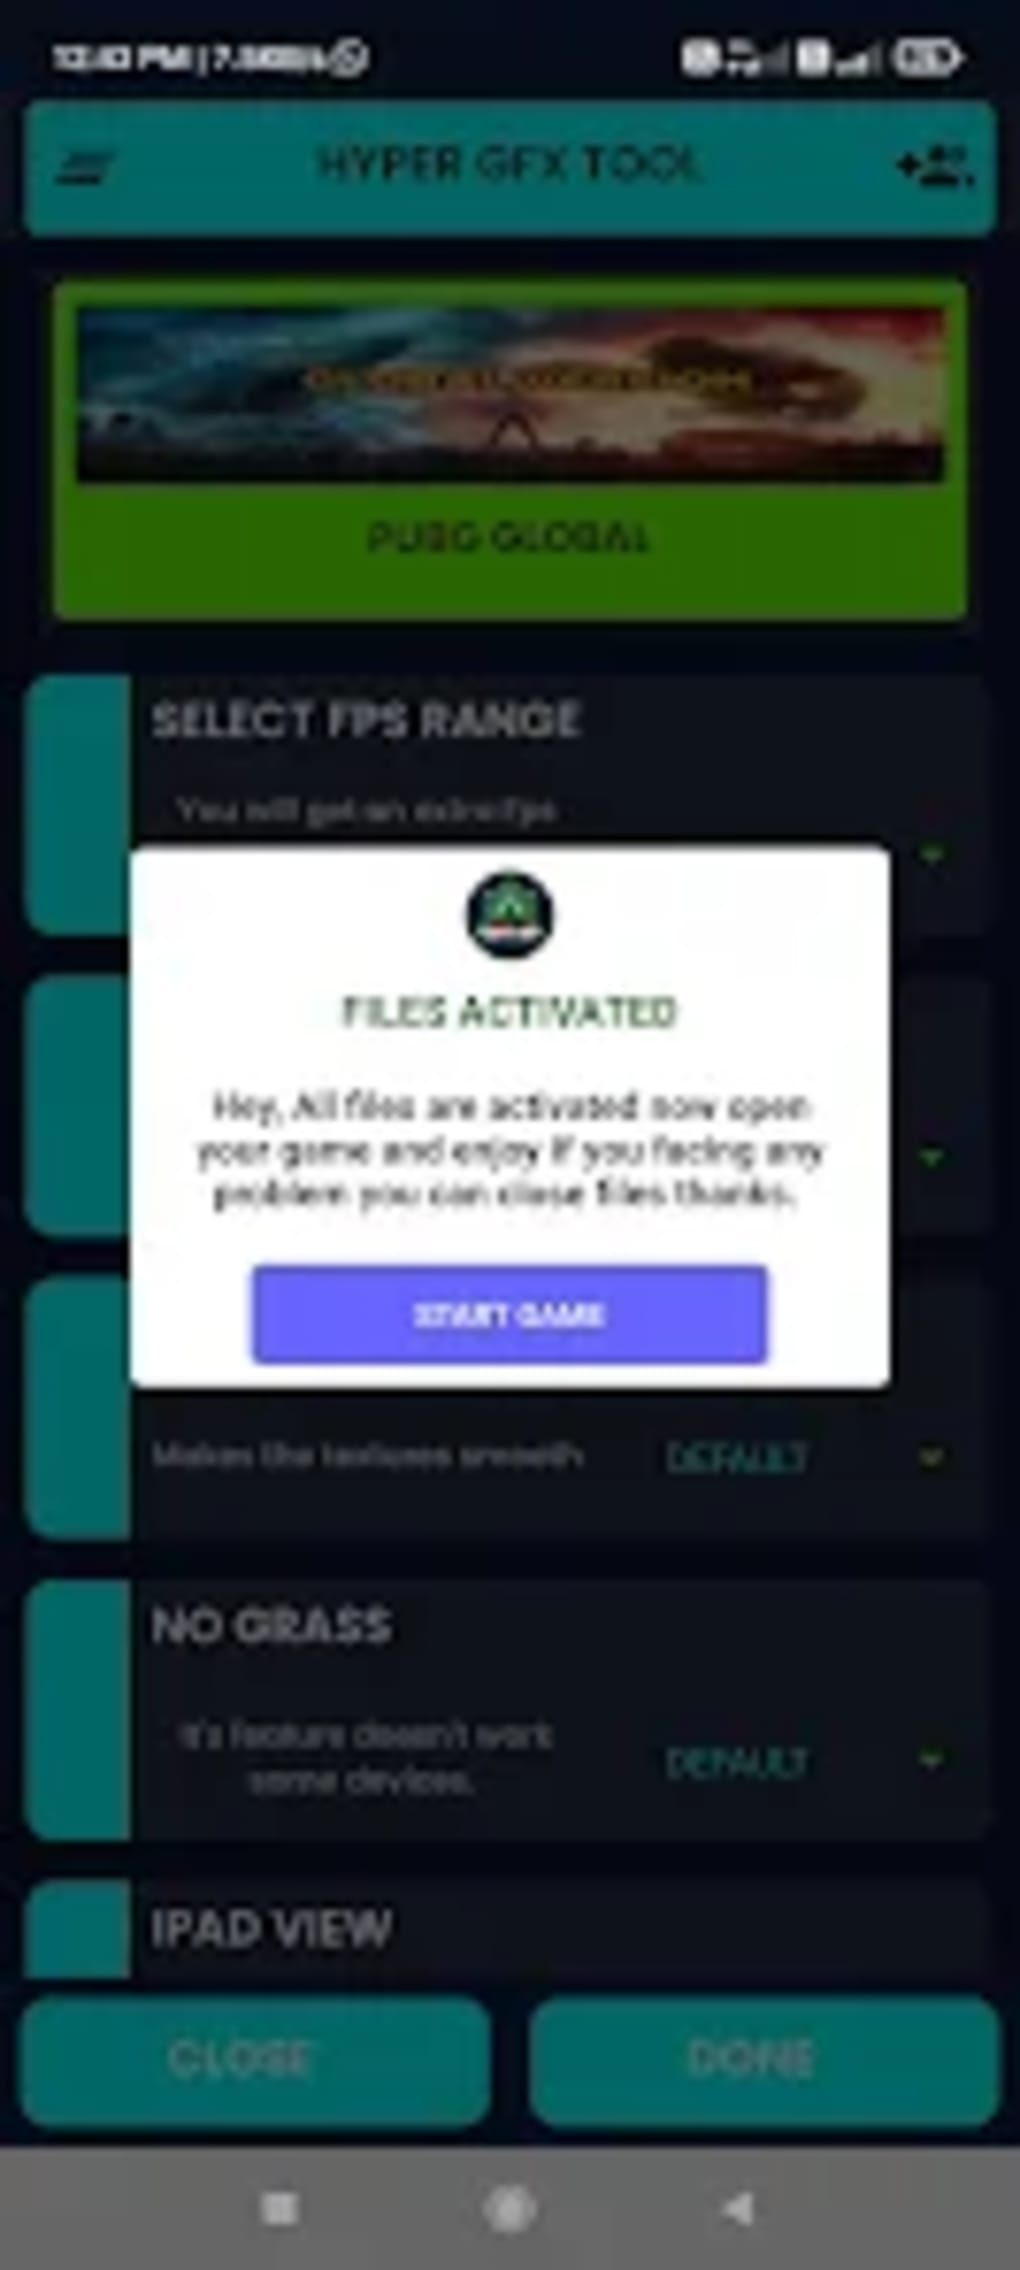 Special permission is required gfx tool pubg фото 53